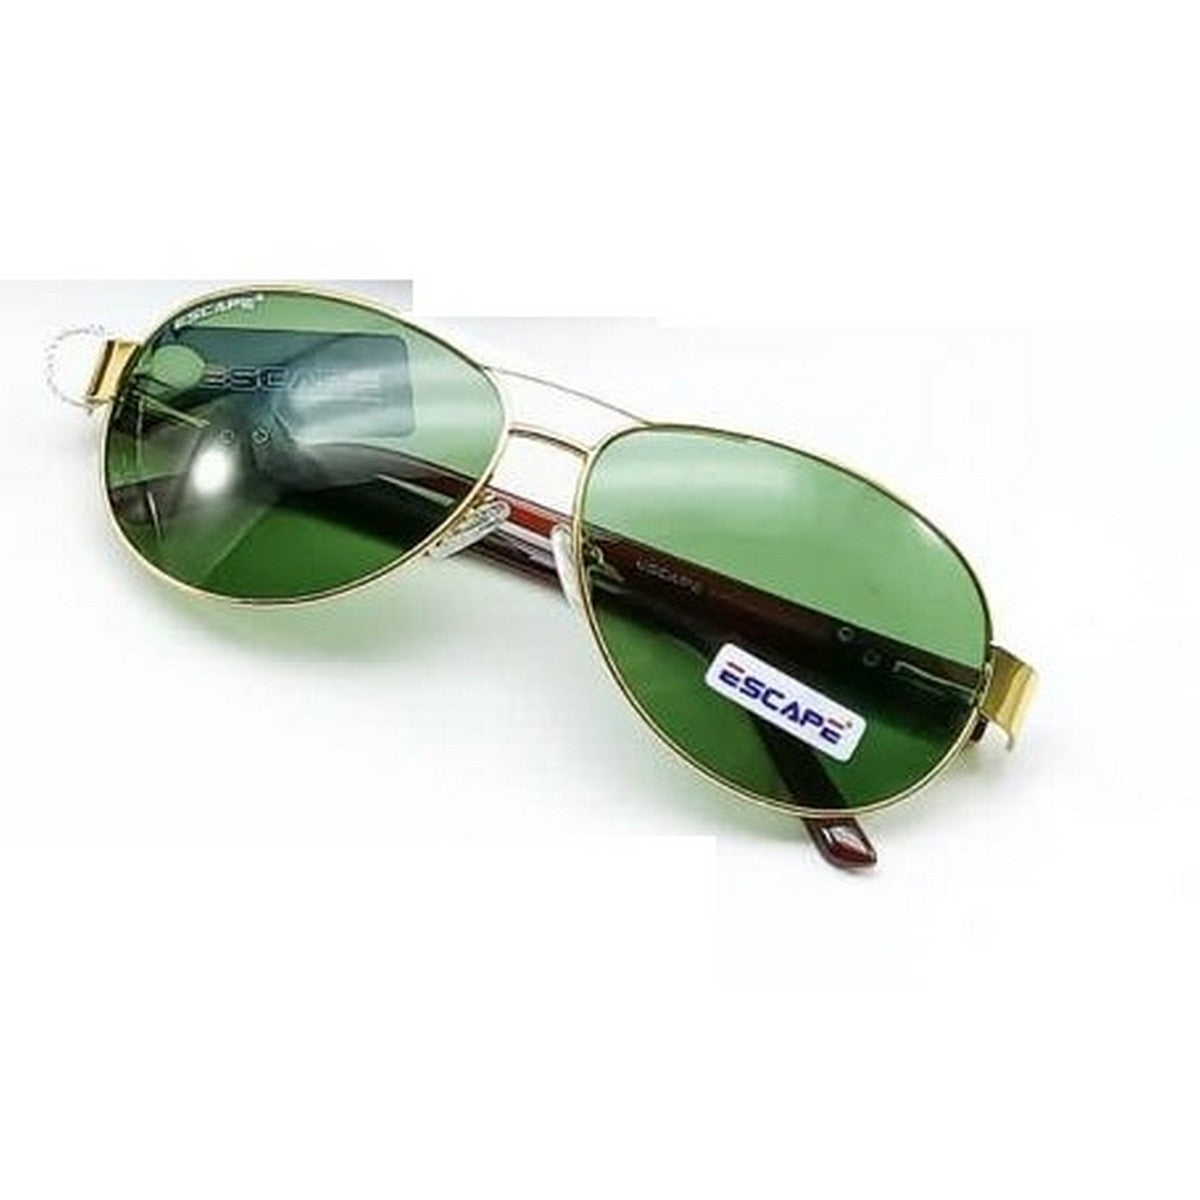 Gold Frame Sunglasses with Glass Lens